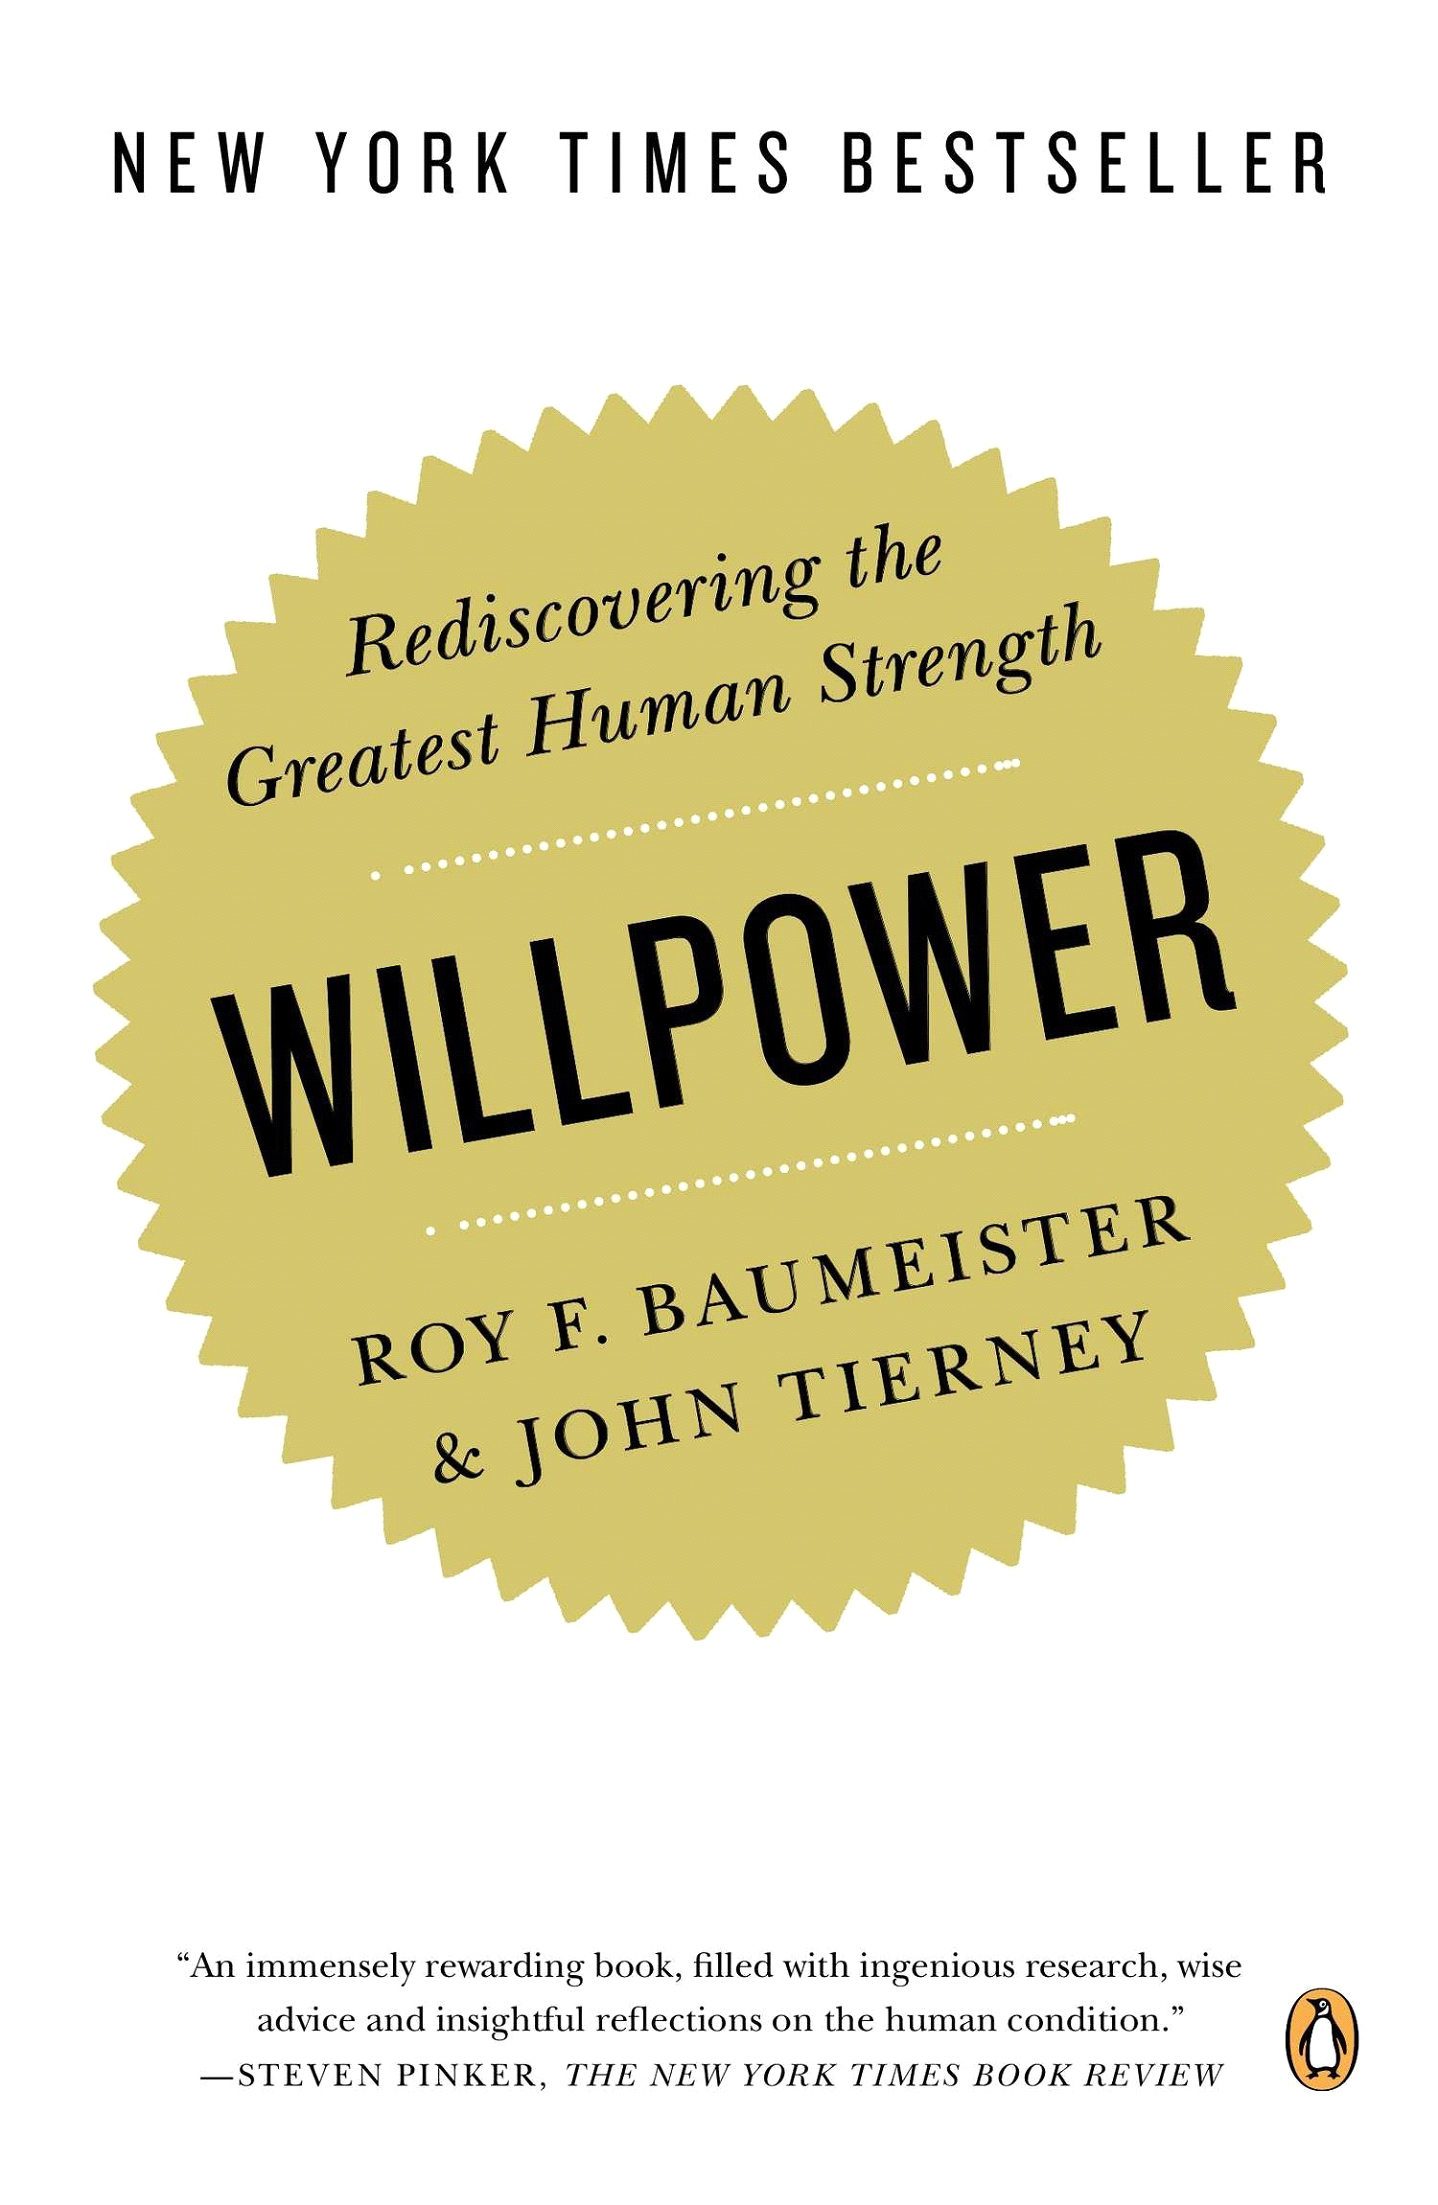 Featured image for “Willpower by John Tierney and Roy Baumeister ”